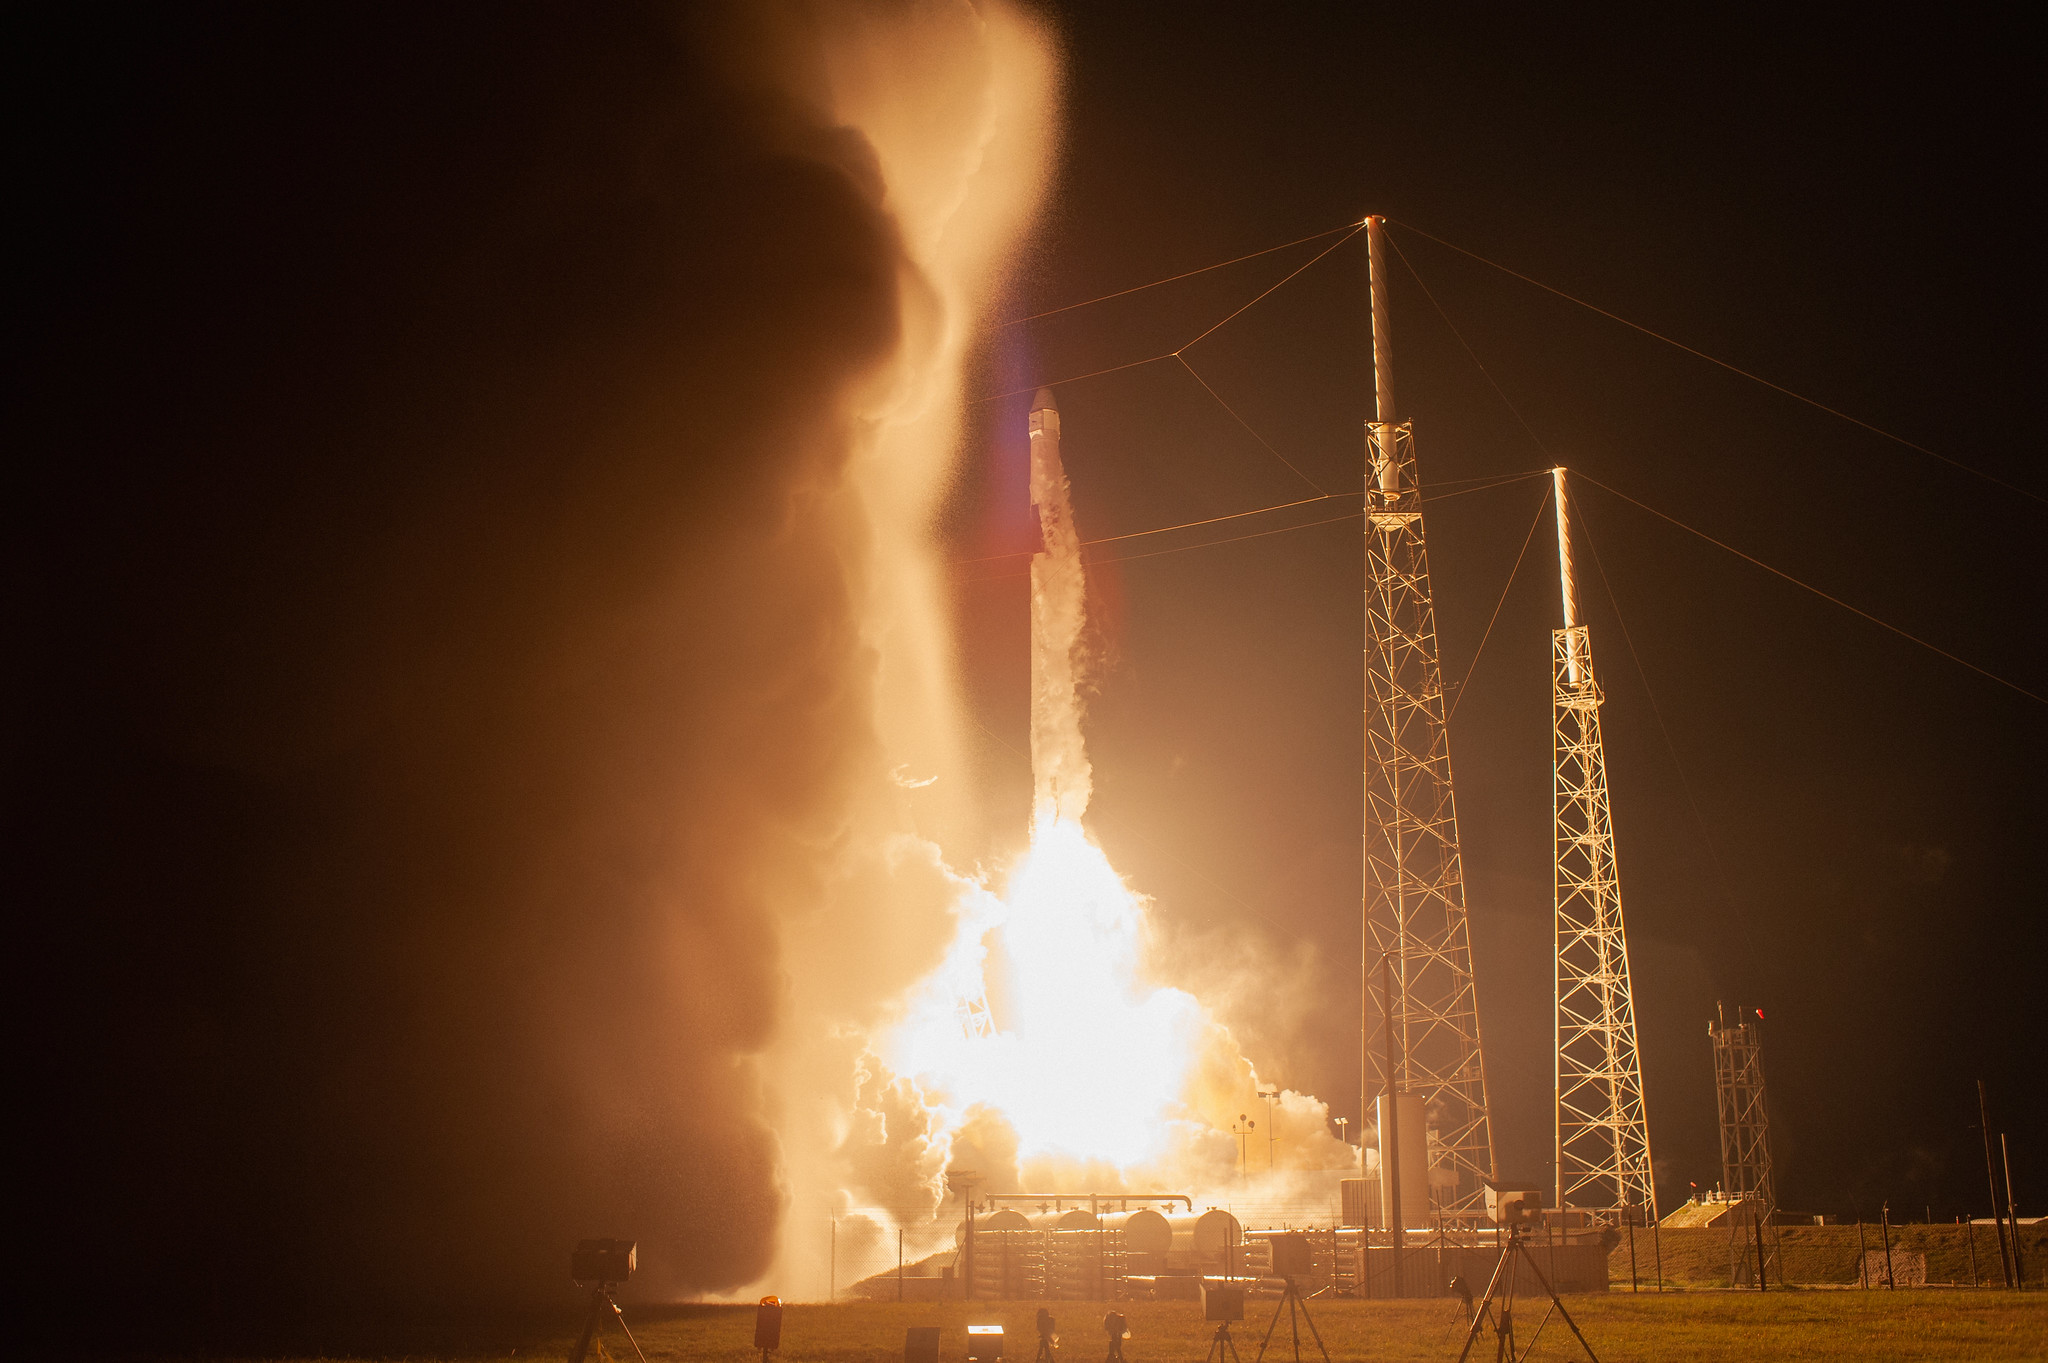 SpaceX Falcon 9 rocket and Dragon cargo craft launches from Space Launch Complex 40